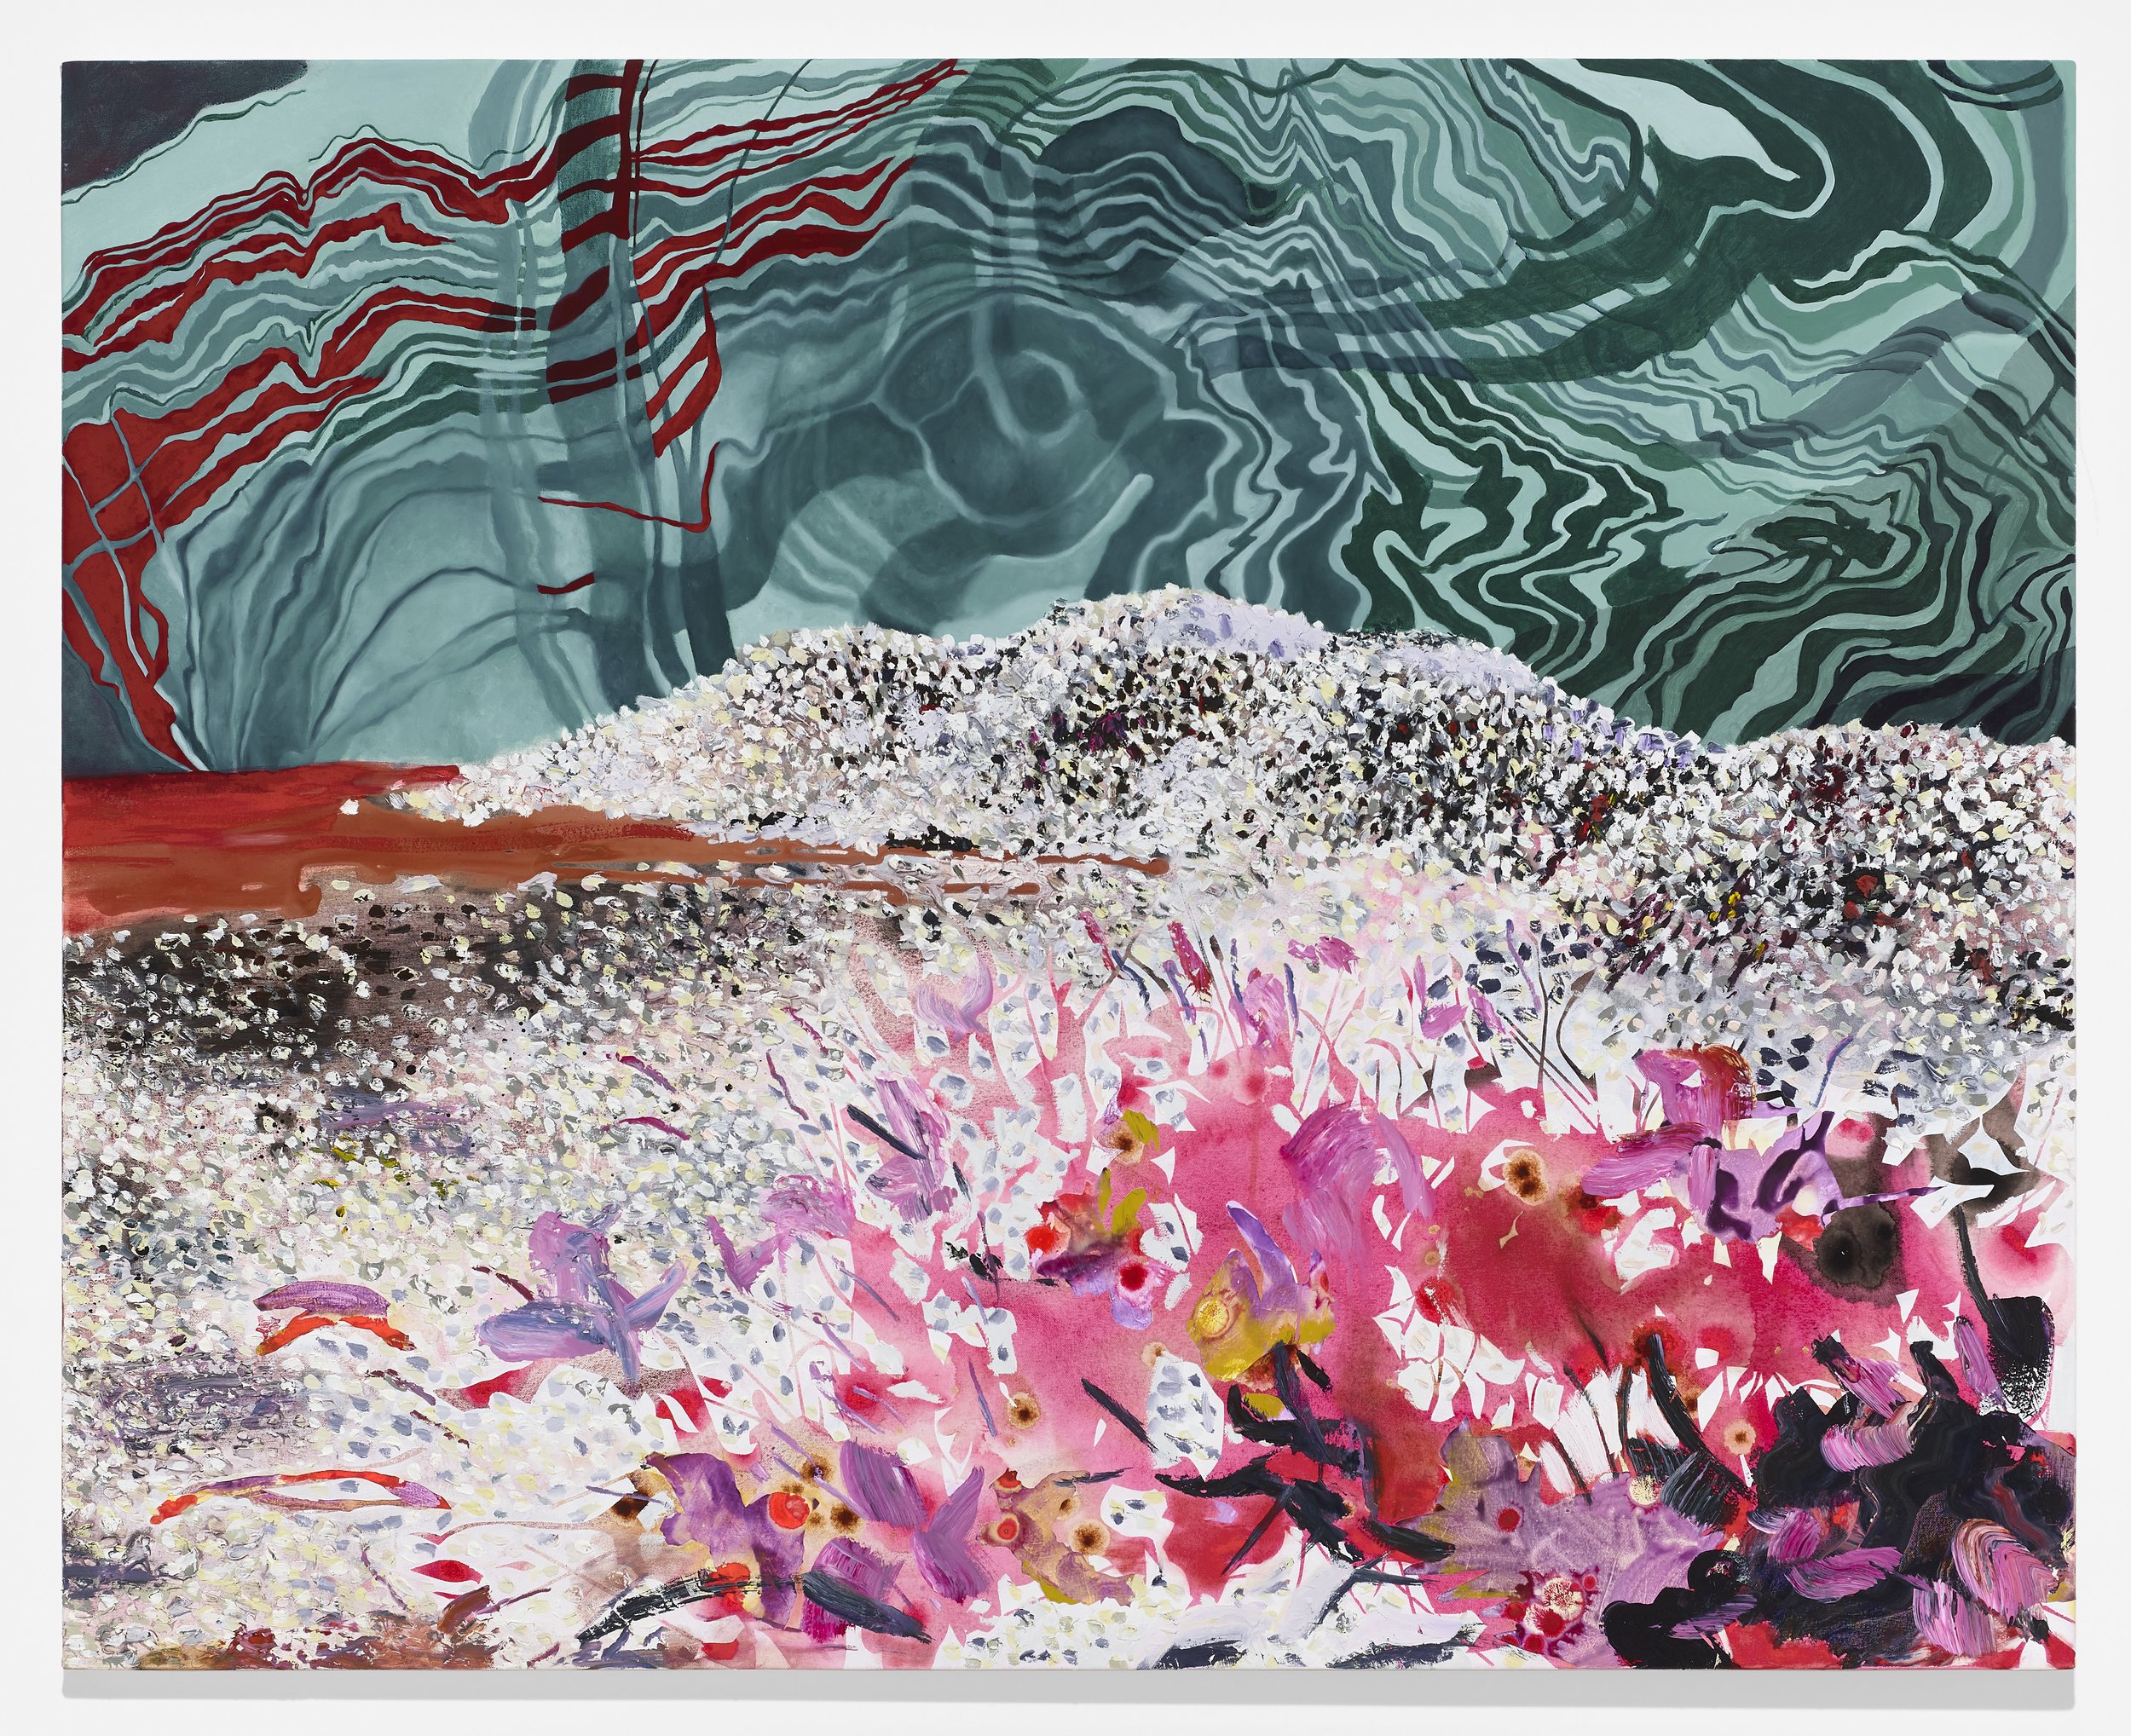   Eva Struble,   Midden,  2022. Acrylic and oil on canvas, 48 x 61 inches.  